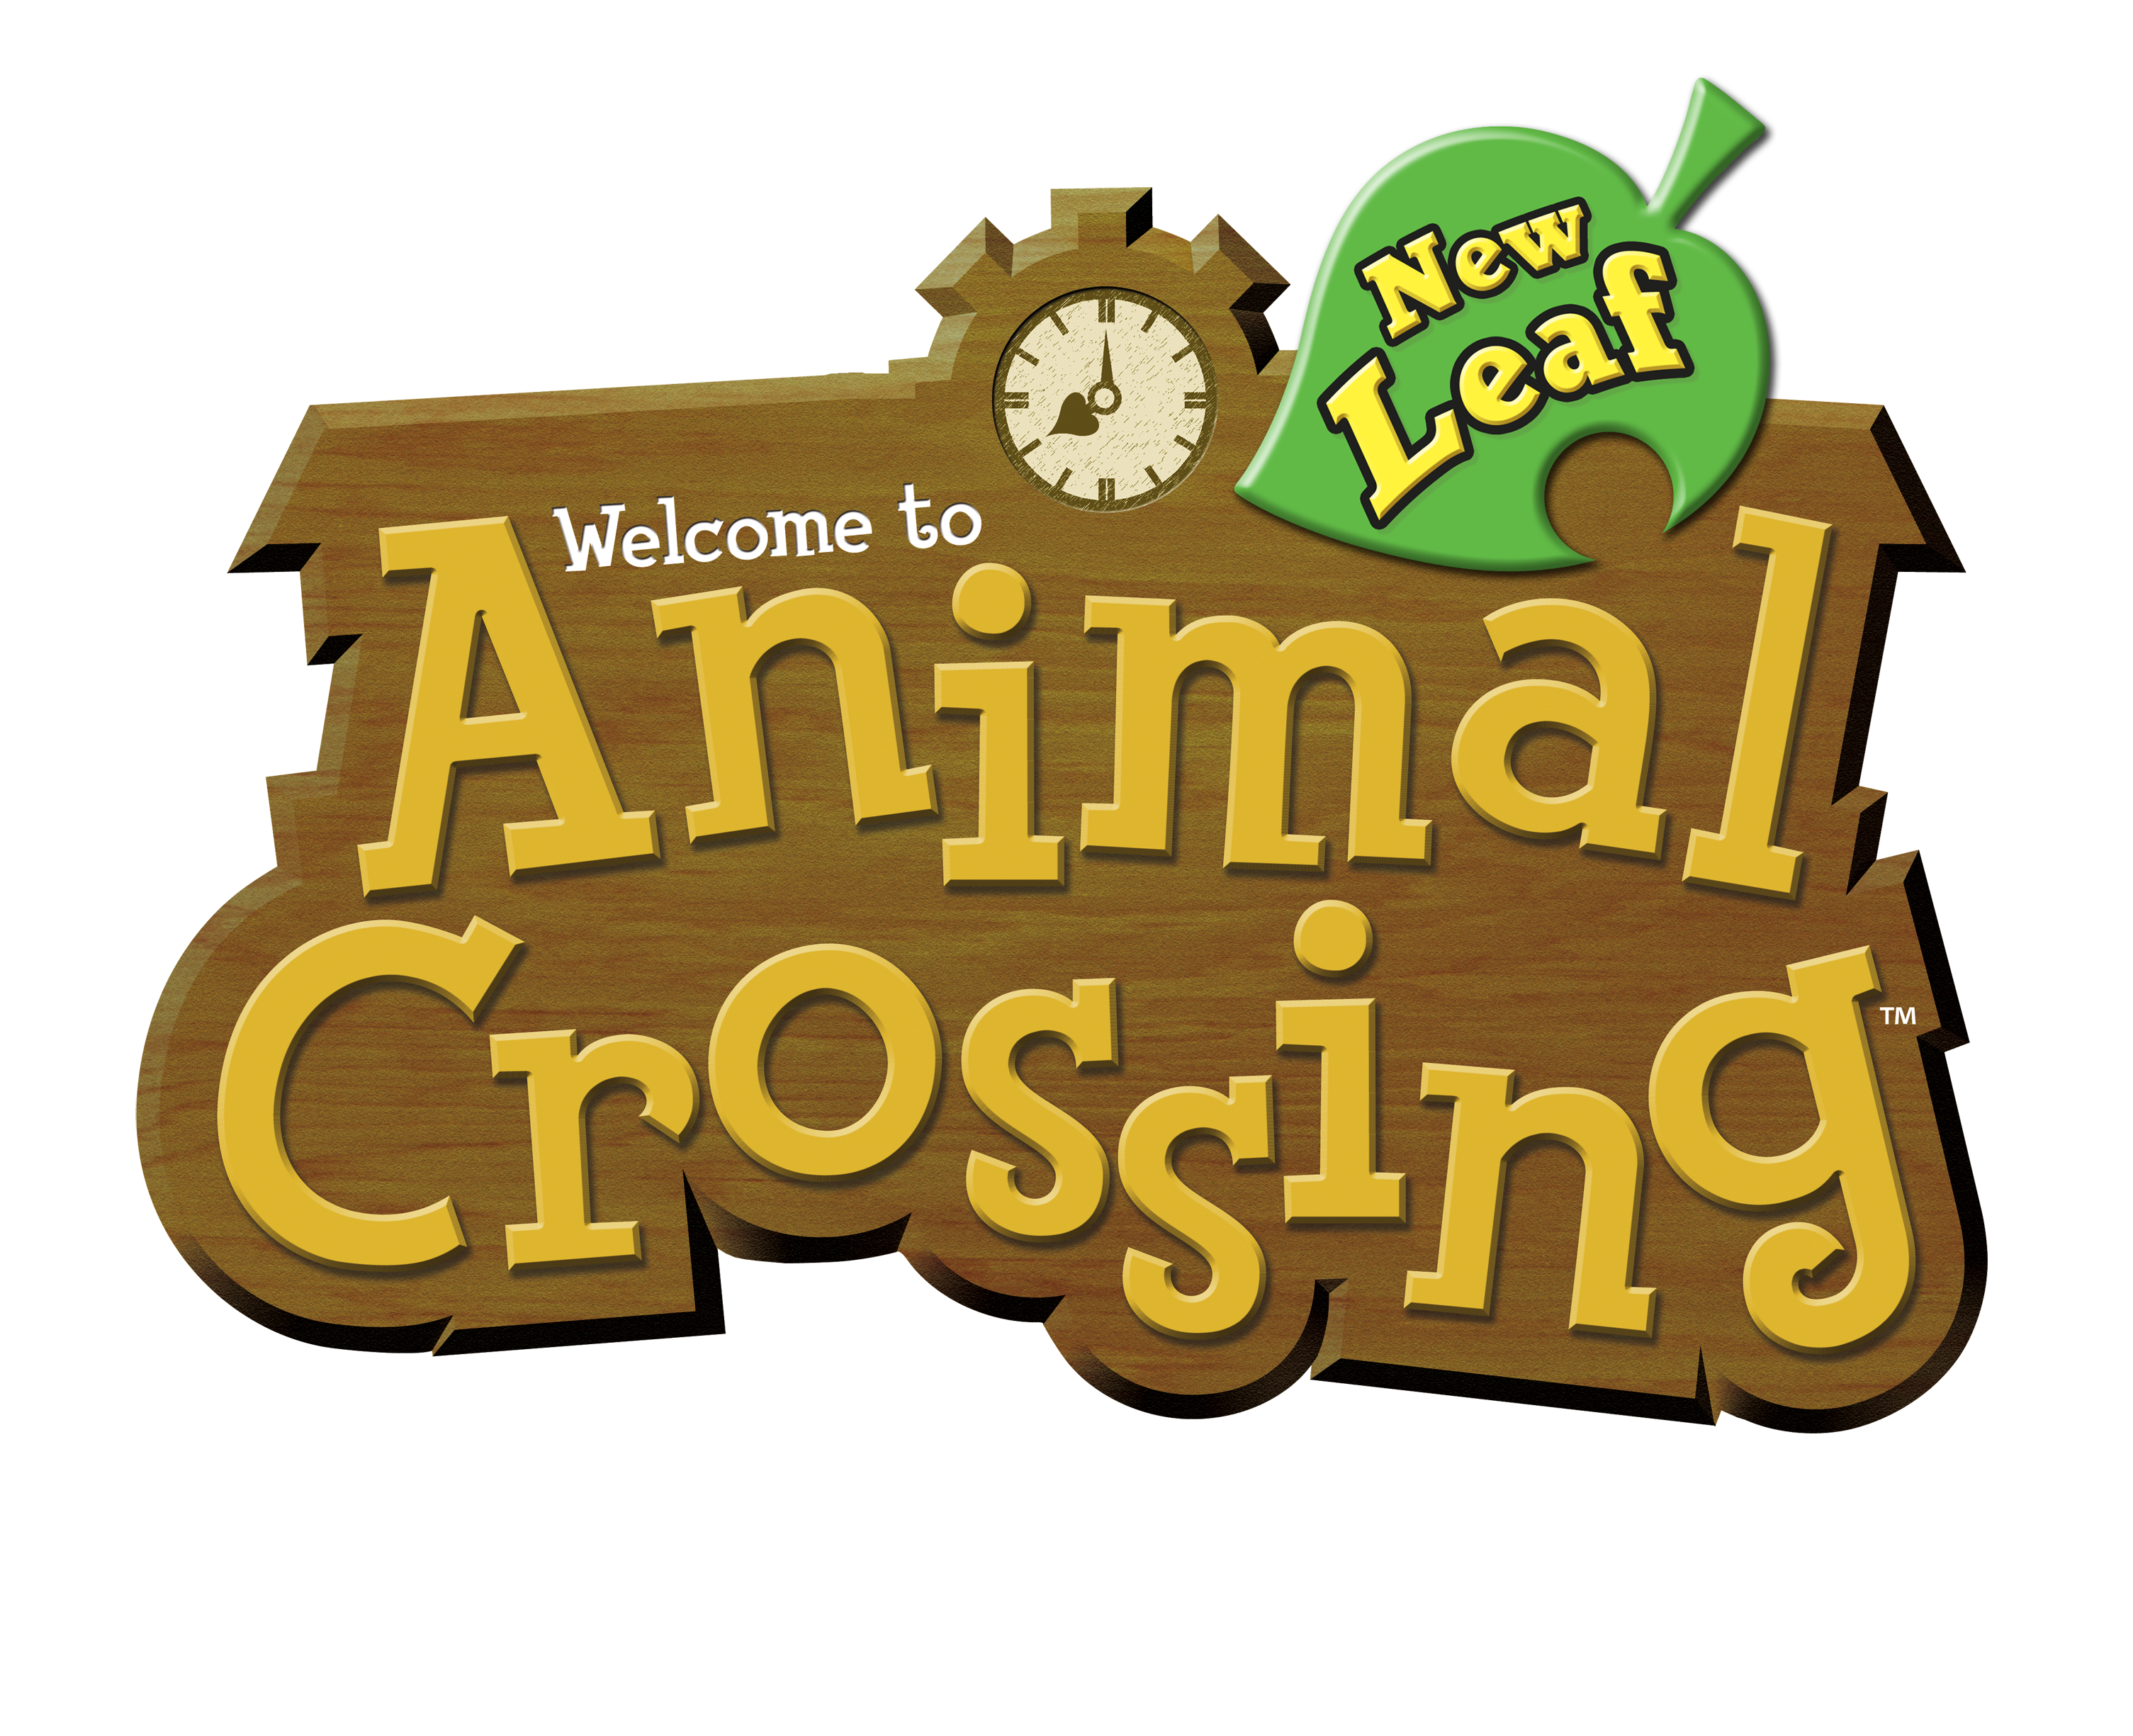 animal crossing new leaf character guide